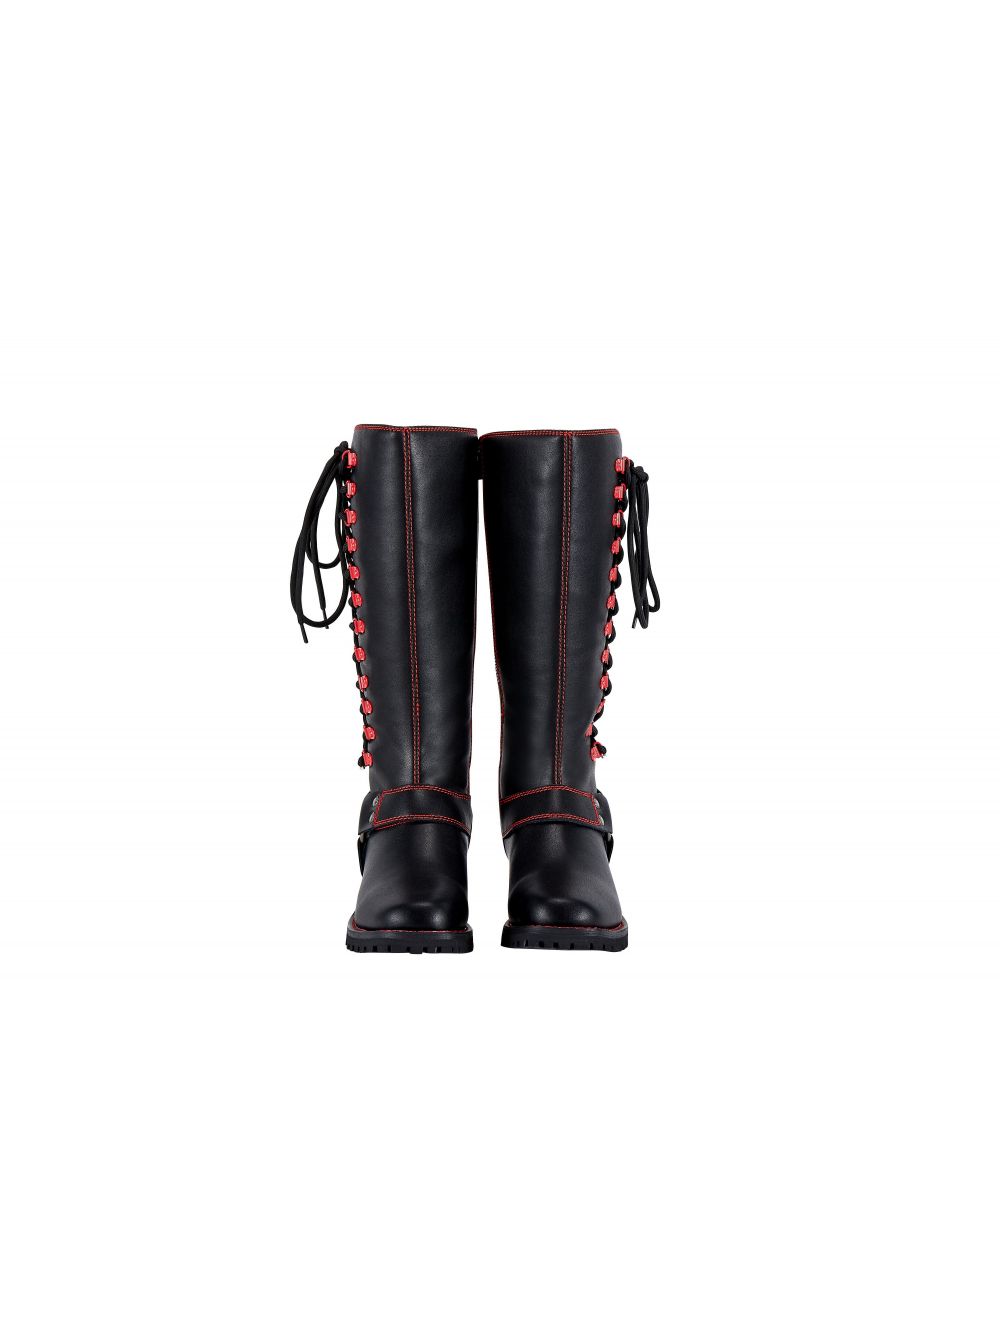 Women's Boots with Red Stitching & Laces